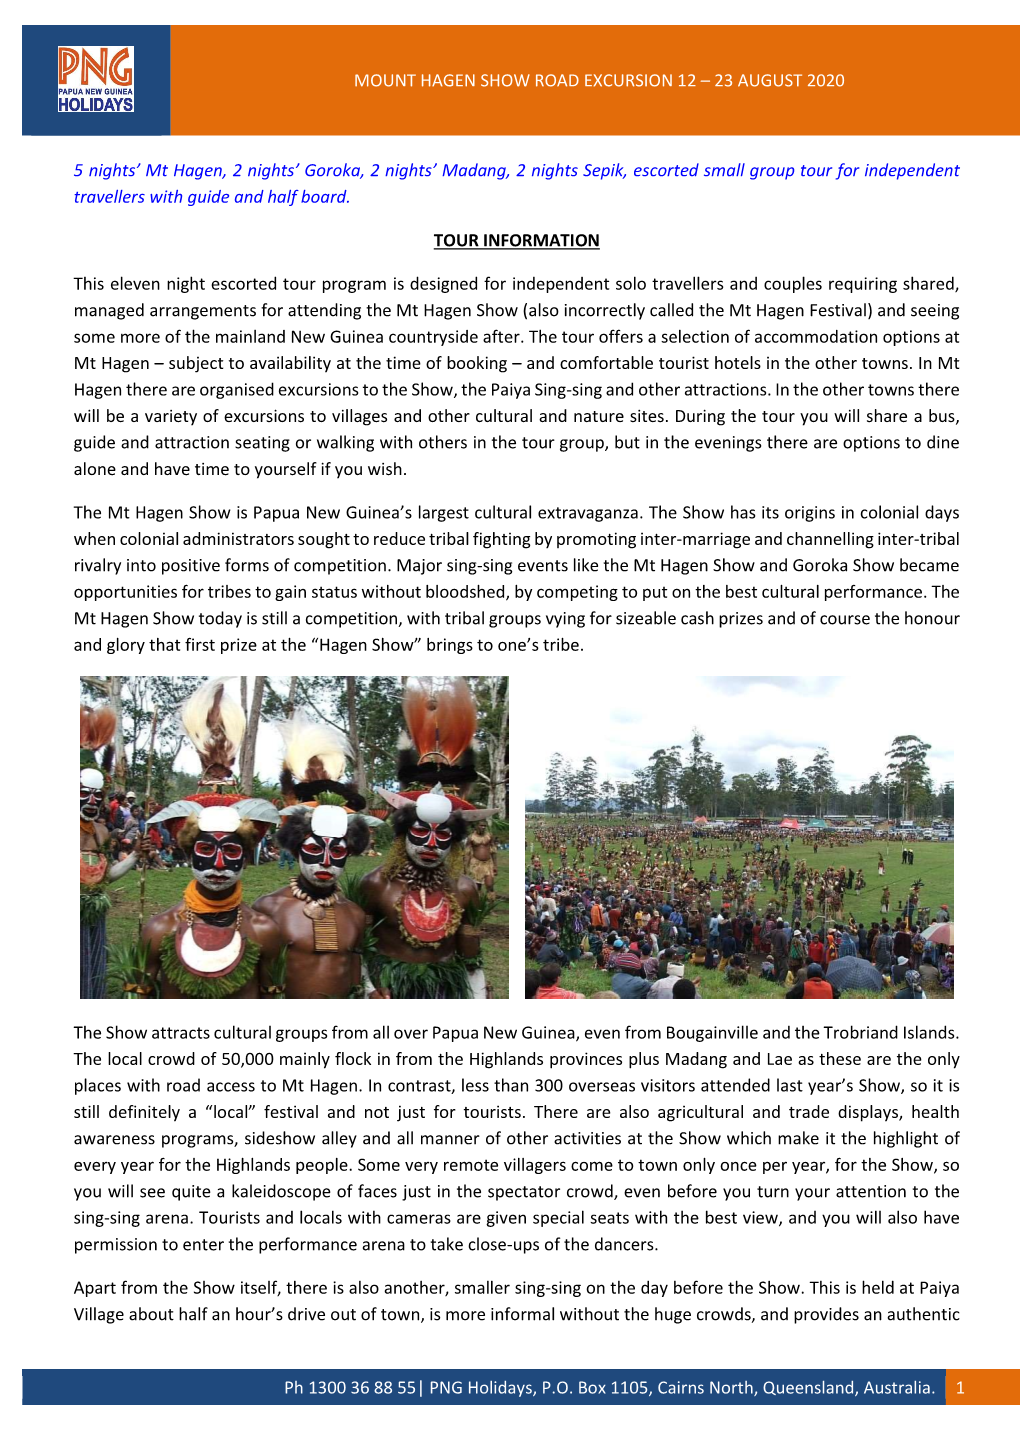 MOUNT HAGEN SHOW ROAD EXCURSION 12 – 23 AUGUST 2020 Ph 1300 36 88 55| PNG Holidays, P.O. Box 1105, Cairns North, Queensland, A